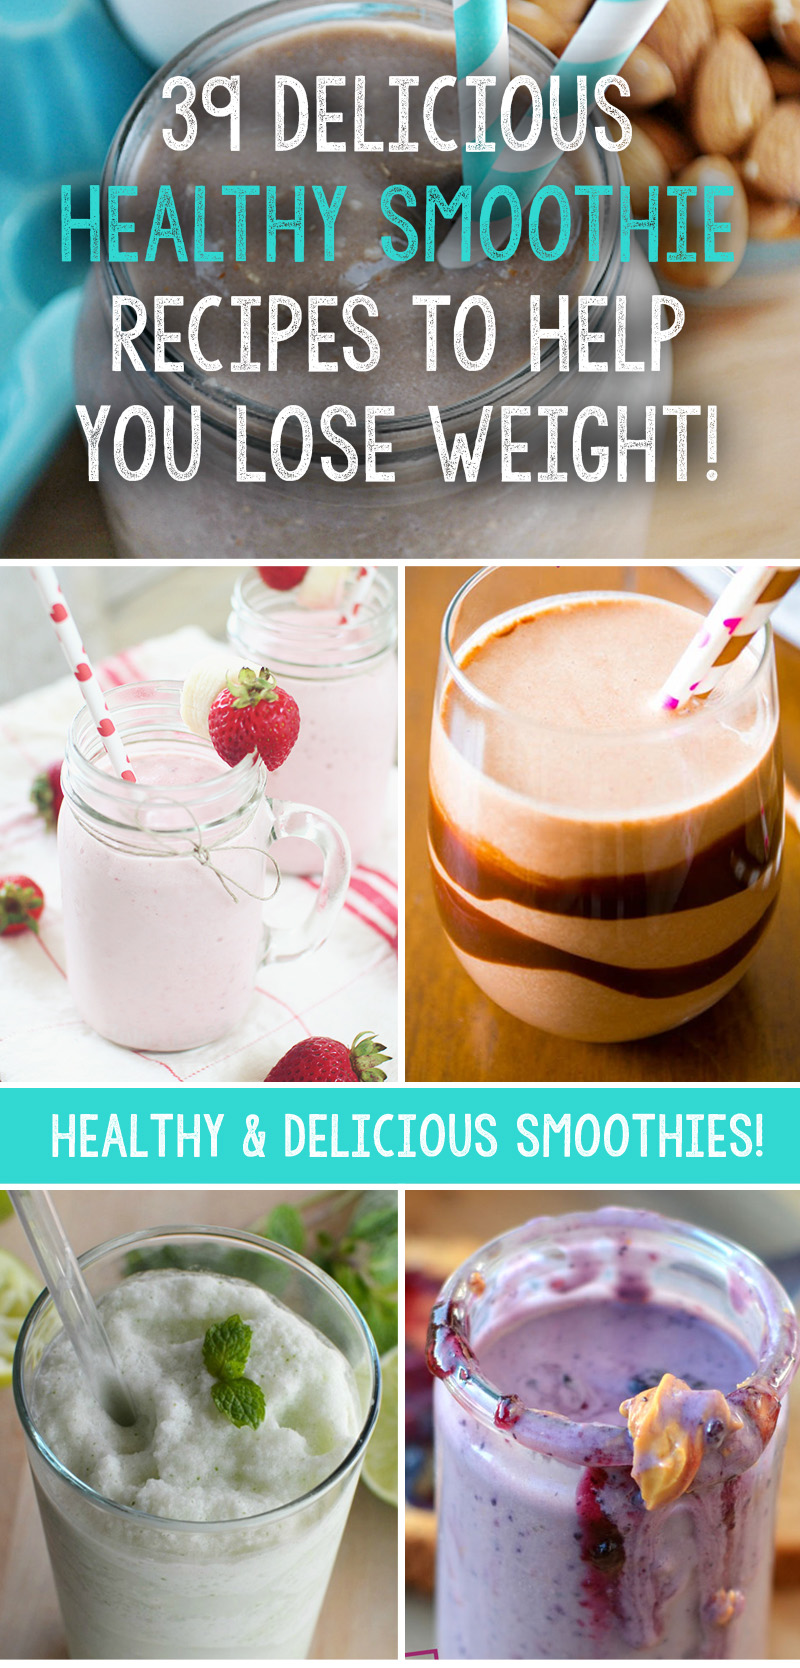 39 Delicious Healthy Smoothie Recipes To Help You Lose Weight